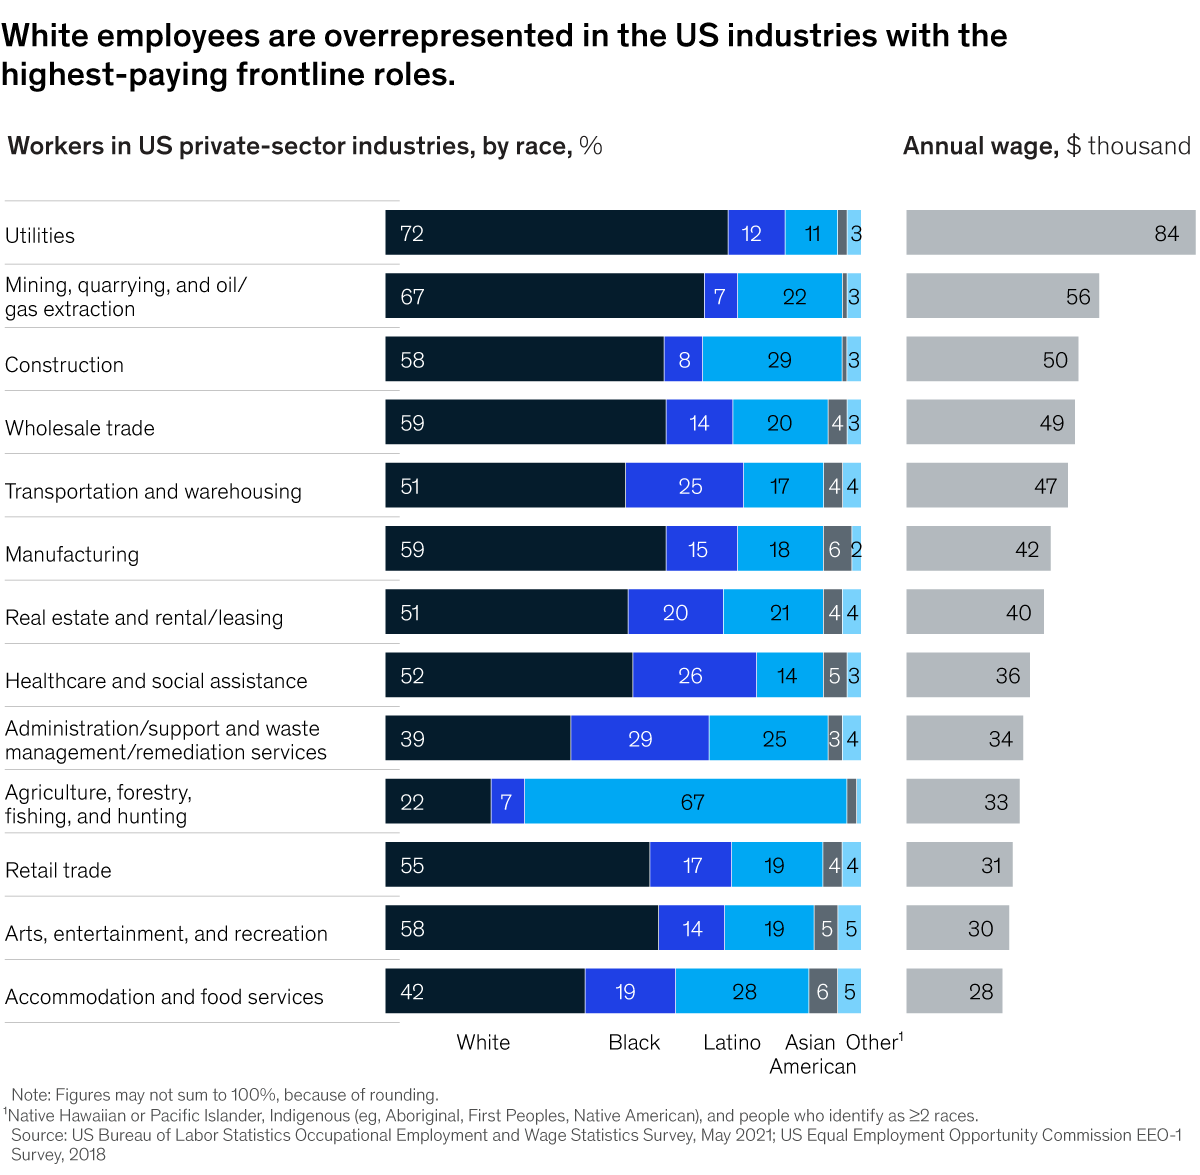 Chart detailing that white employees are overrepresented in the US industries with the highest-paying frontline roles.